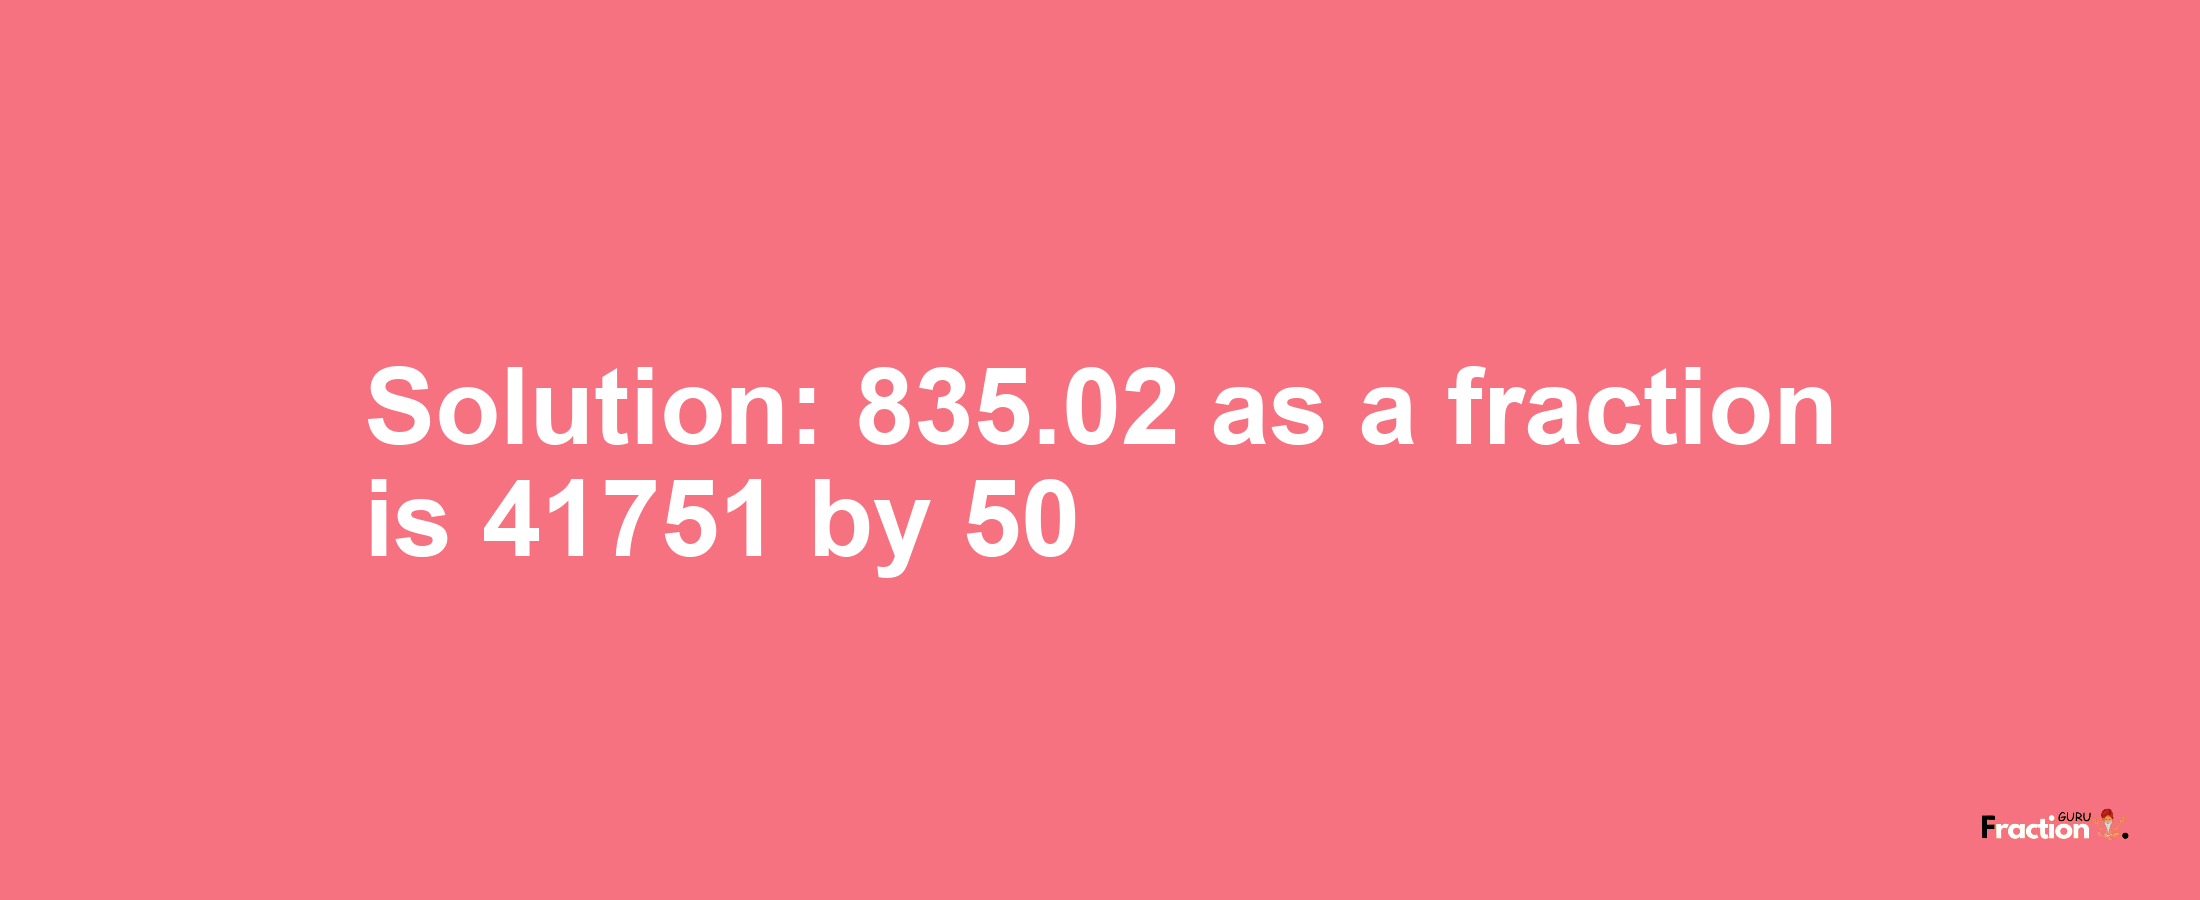 Solution:835.02 as a fraction is 41751/50